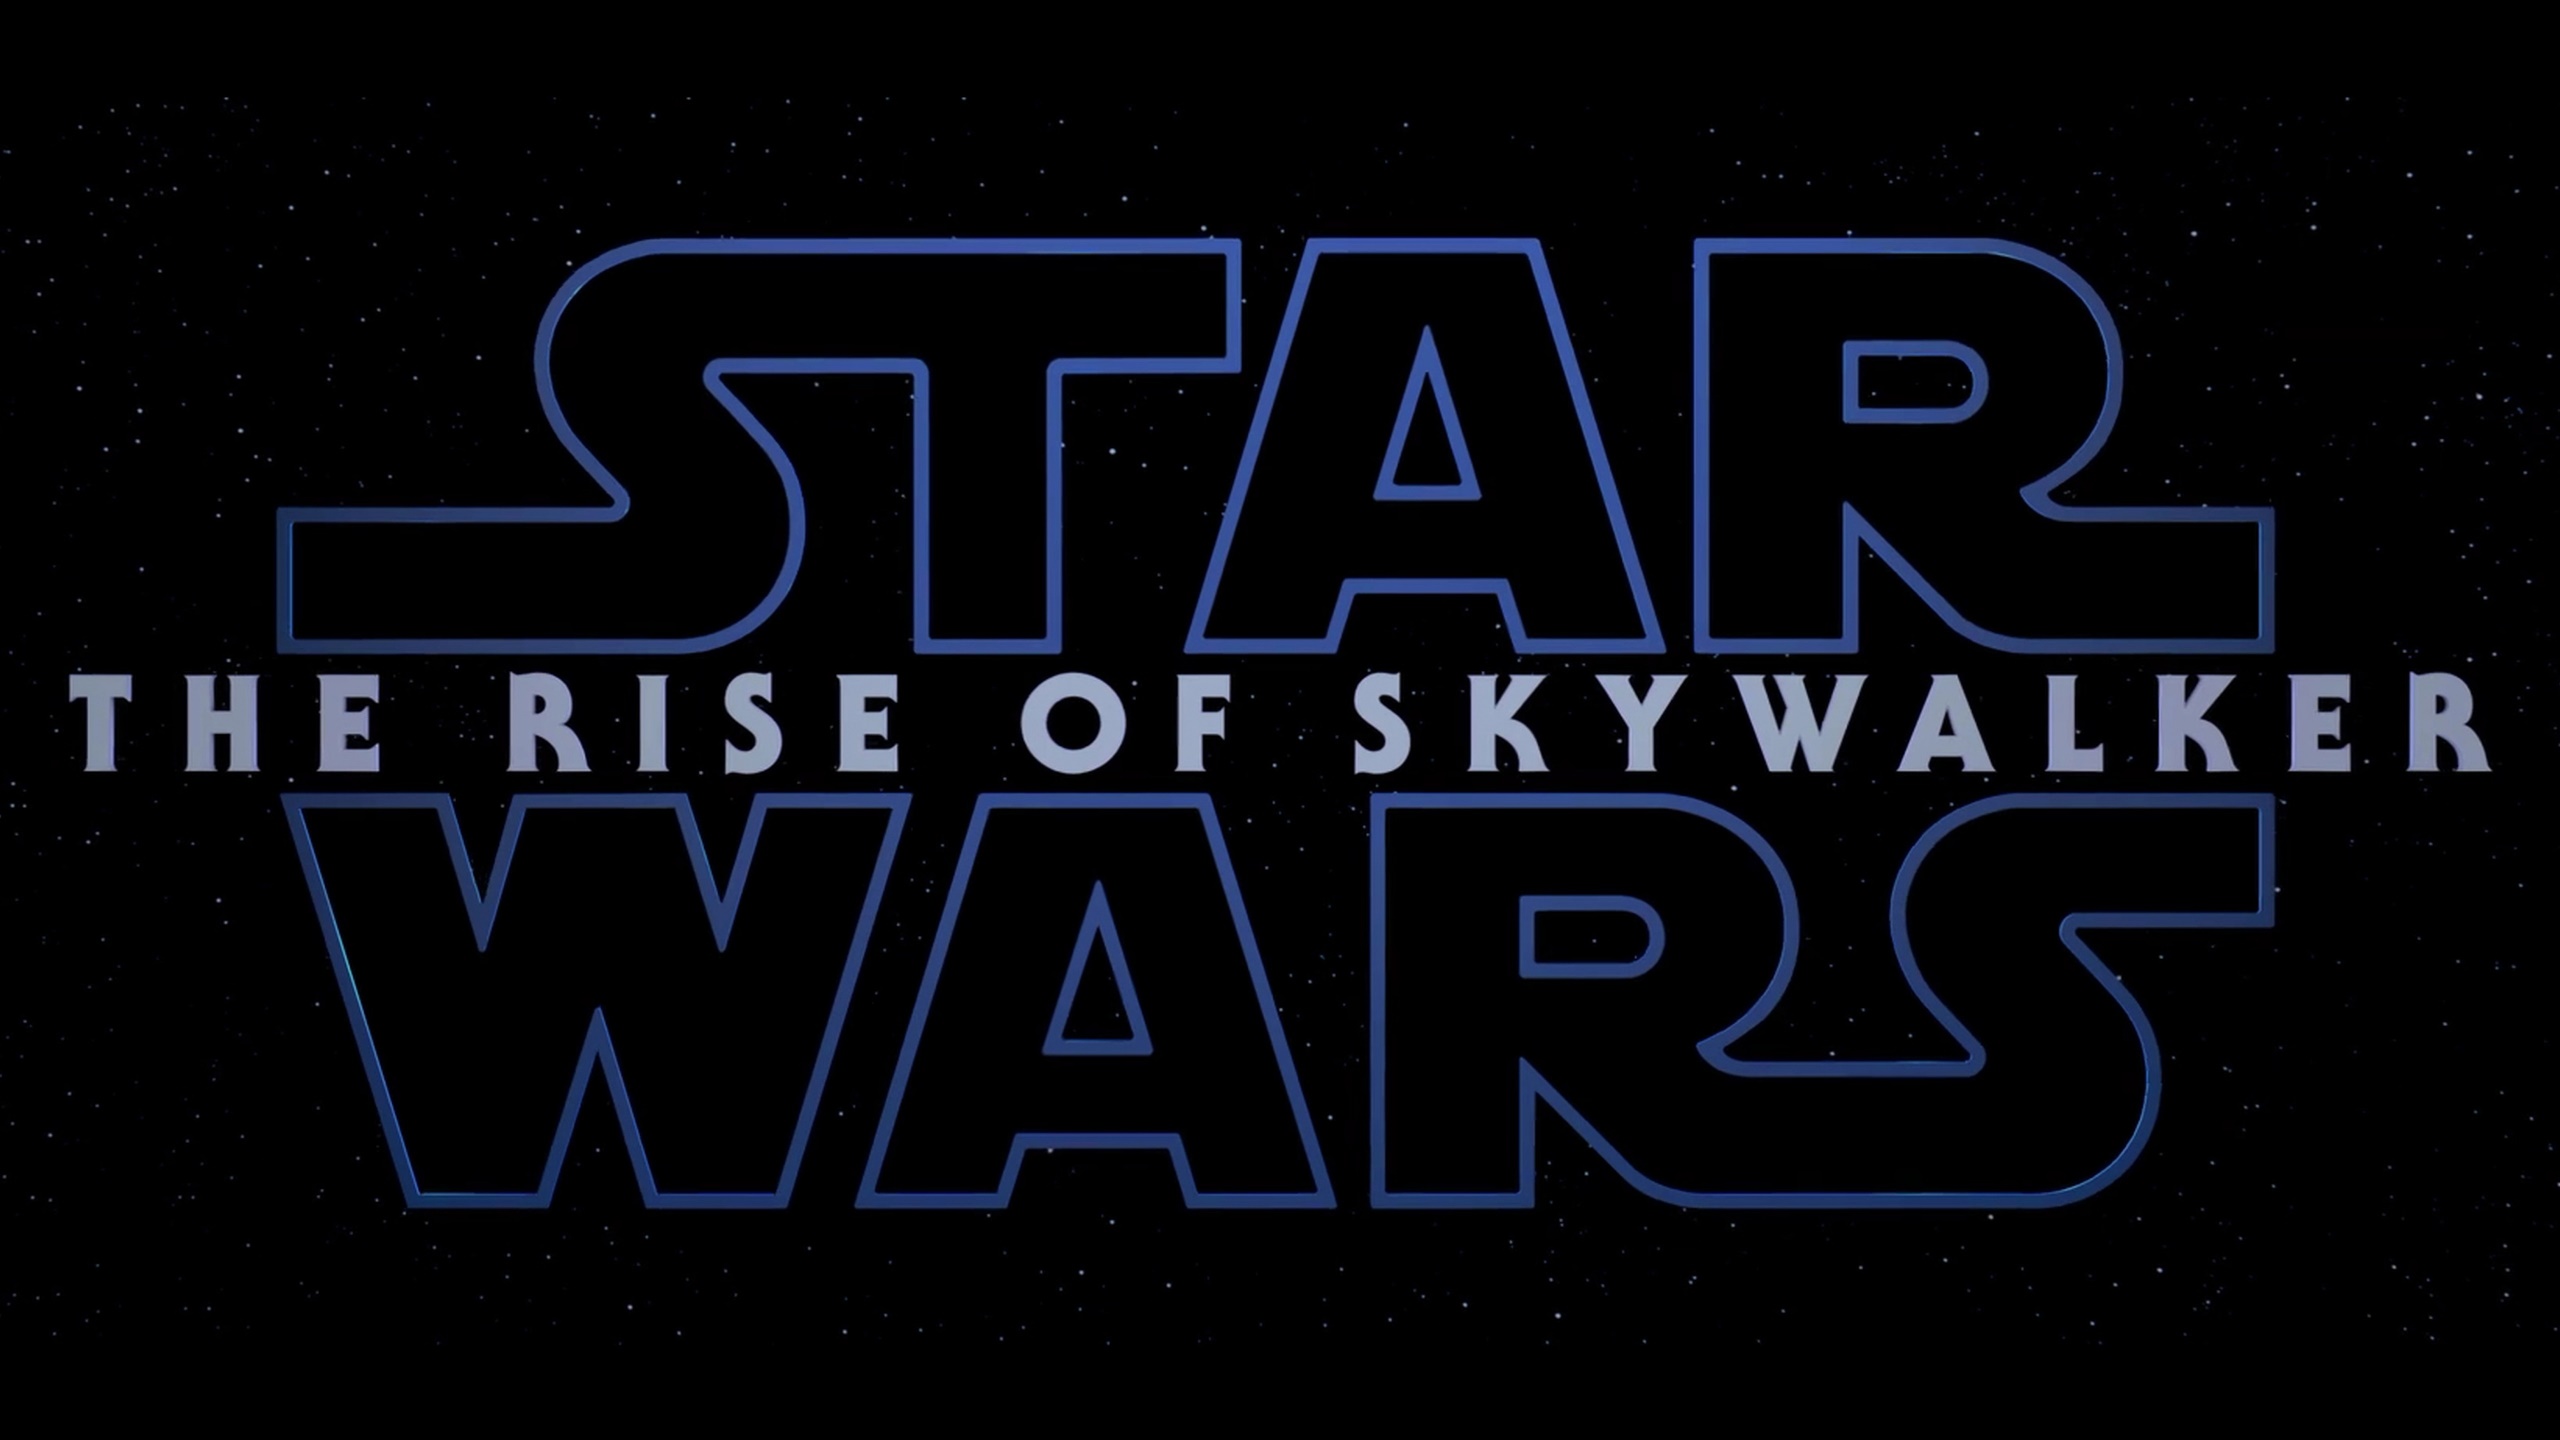 Star Wars Movies Star Wars Episode IX The Rise Of Skywalker Science Fiction 2019 Year 2560x1440